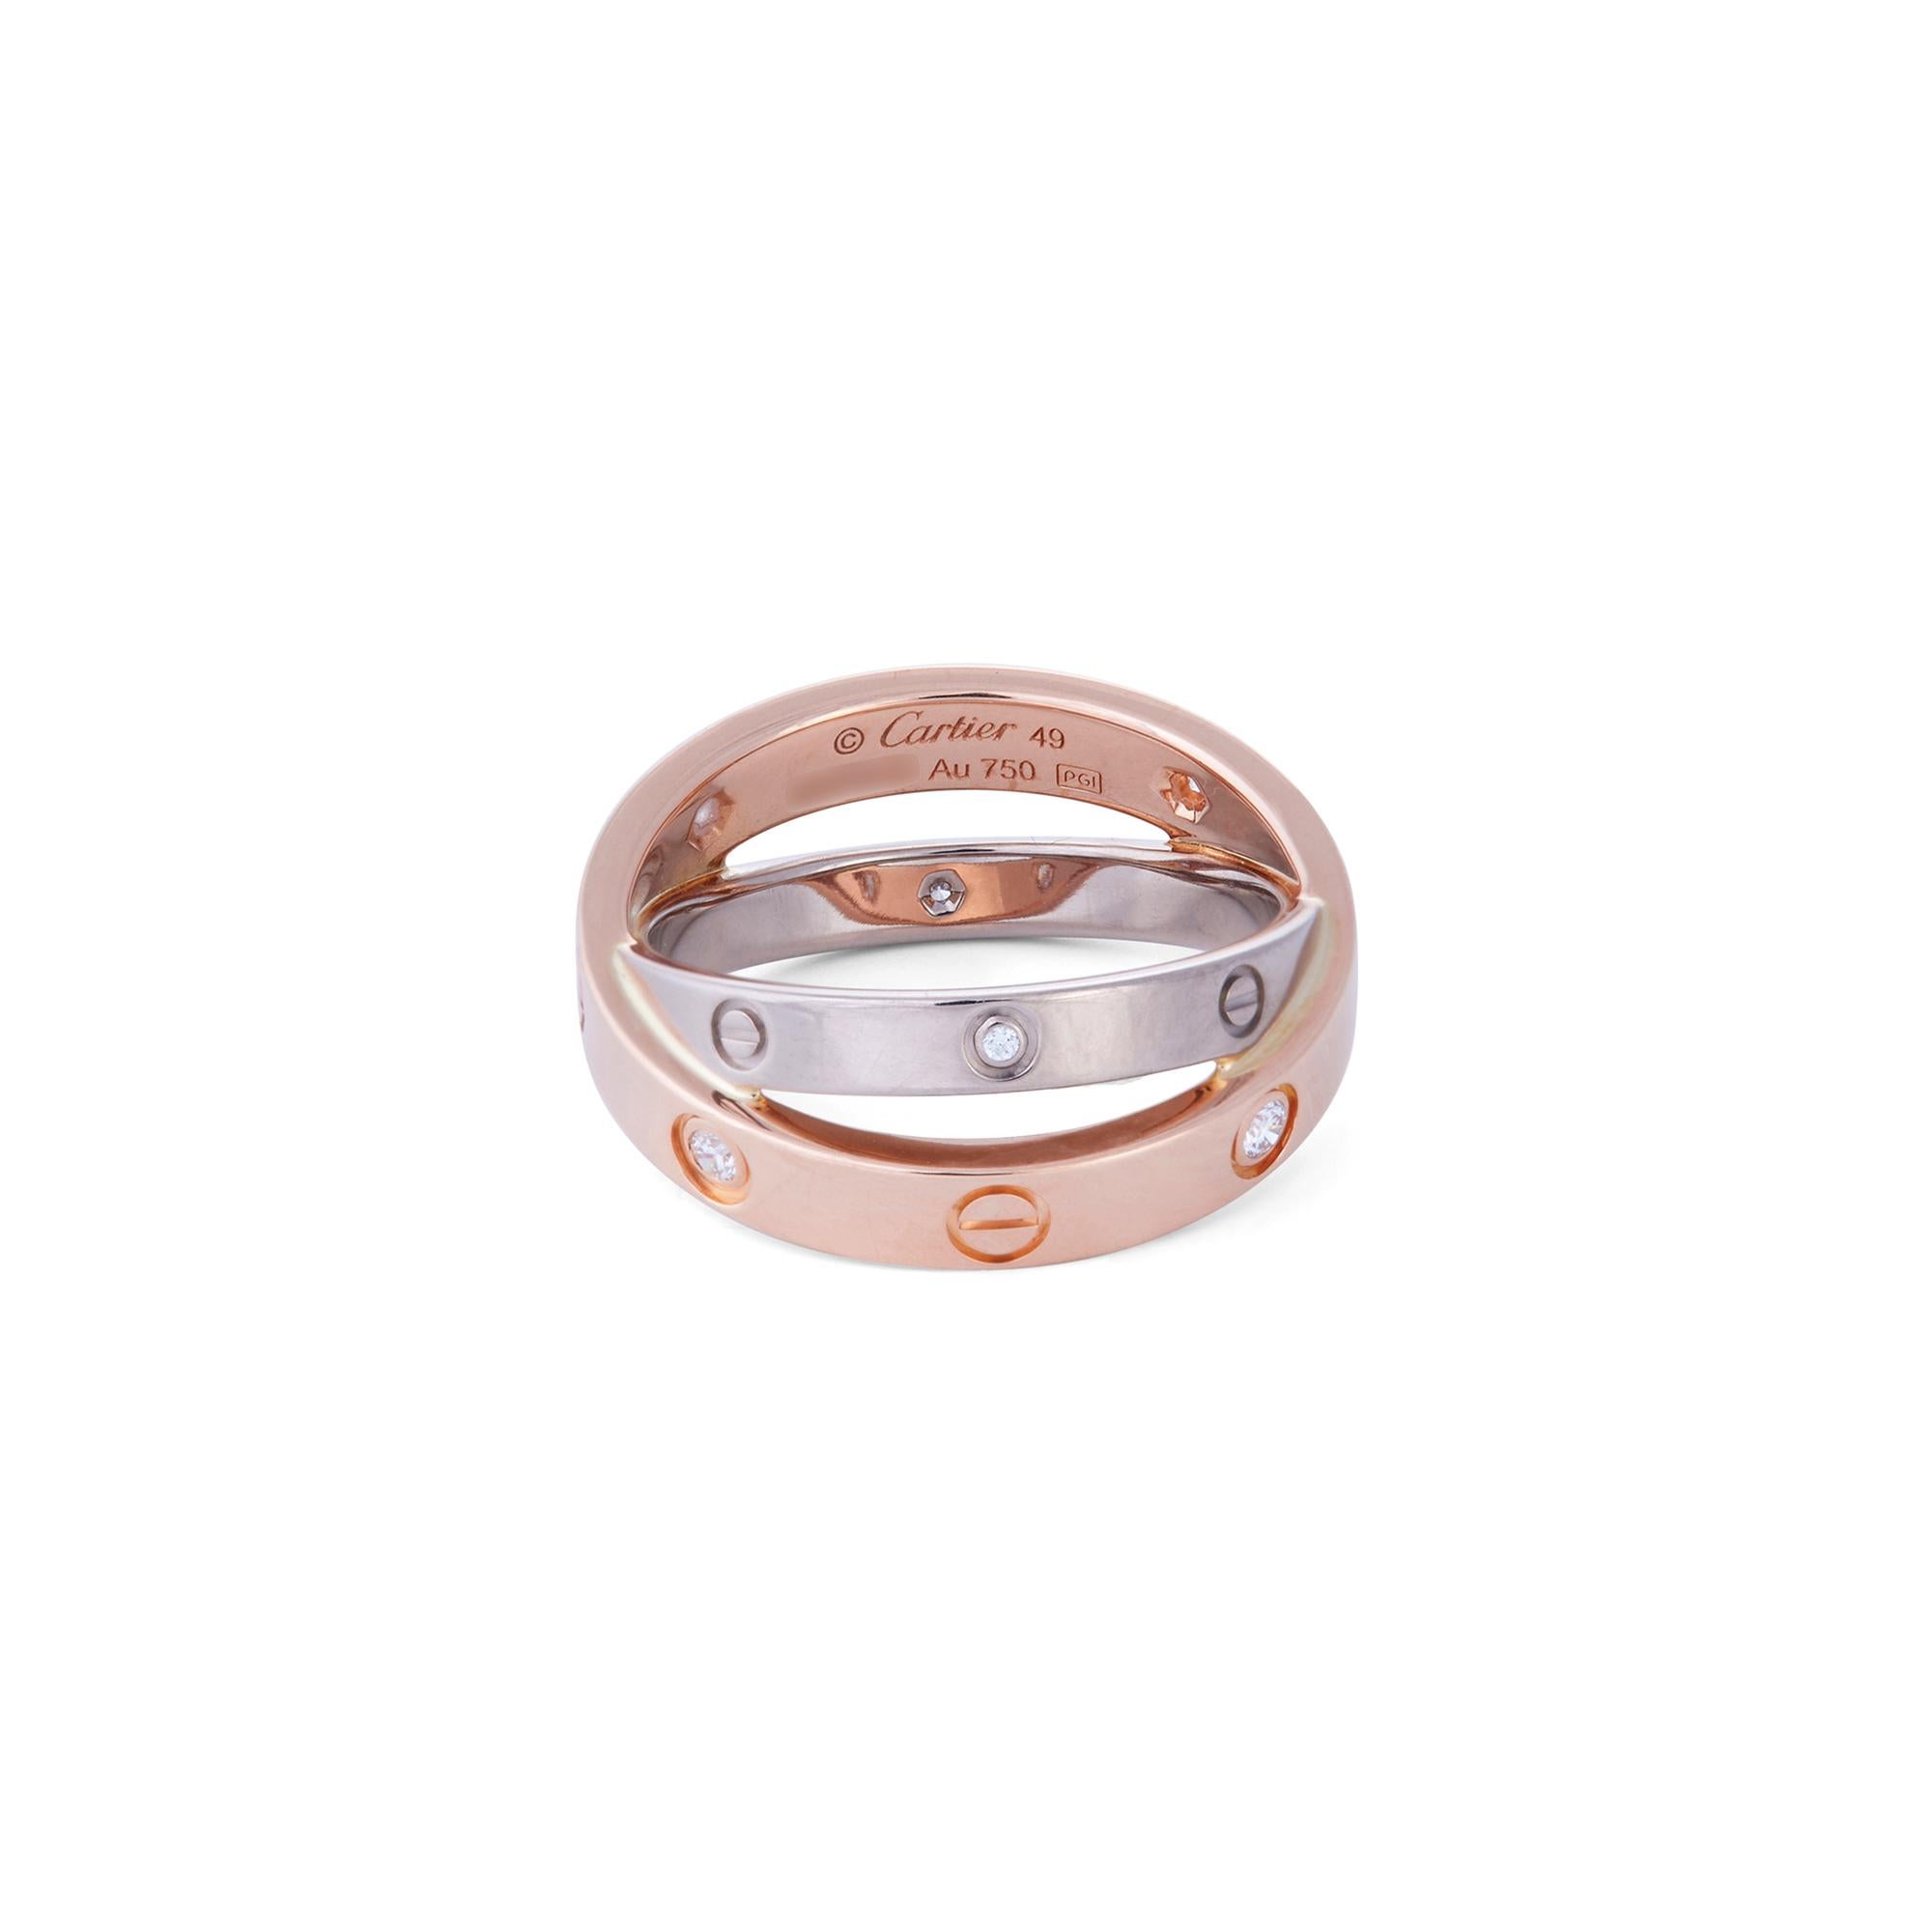 Authentic Cartier Love ring crafted in 18 karat rose and white gold. Set with 6 round cut diamonds weighing an estimated .07 carats total. The rose gold band measures 3.5mm and crosses over a slightly thinner white gold band, measuring 2.6mm. Signed